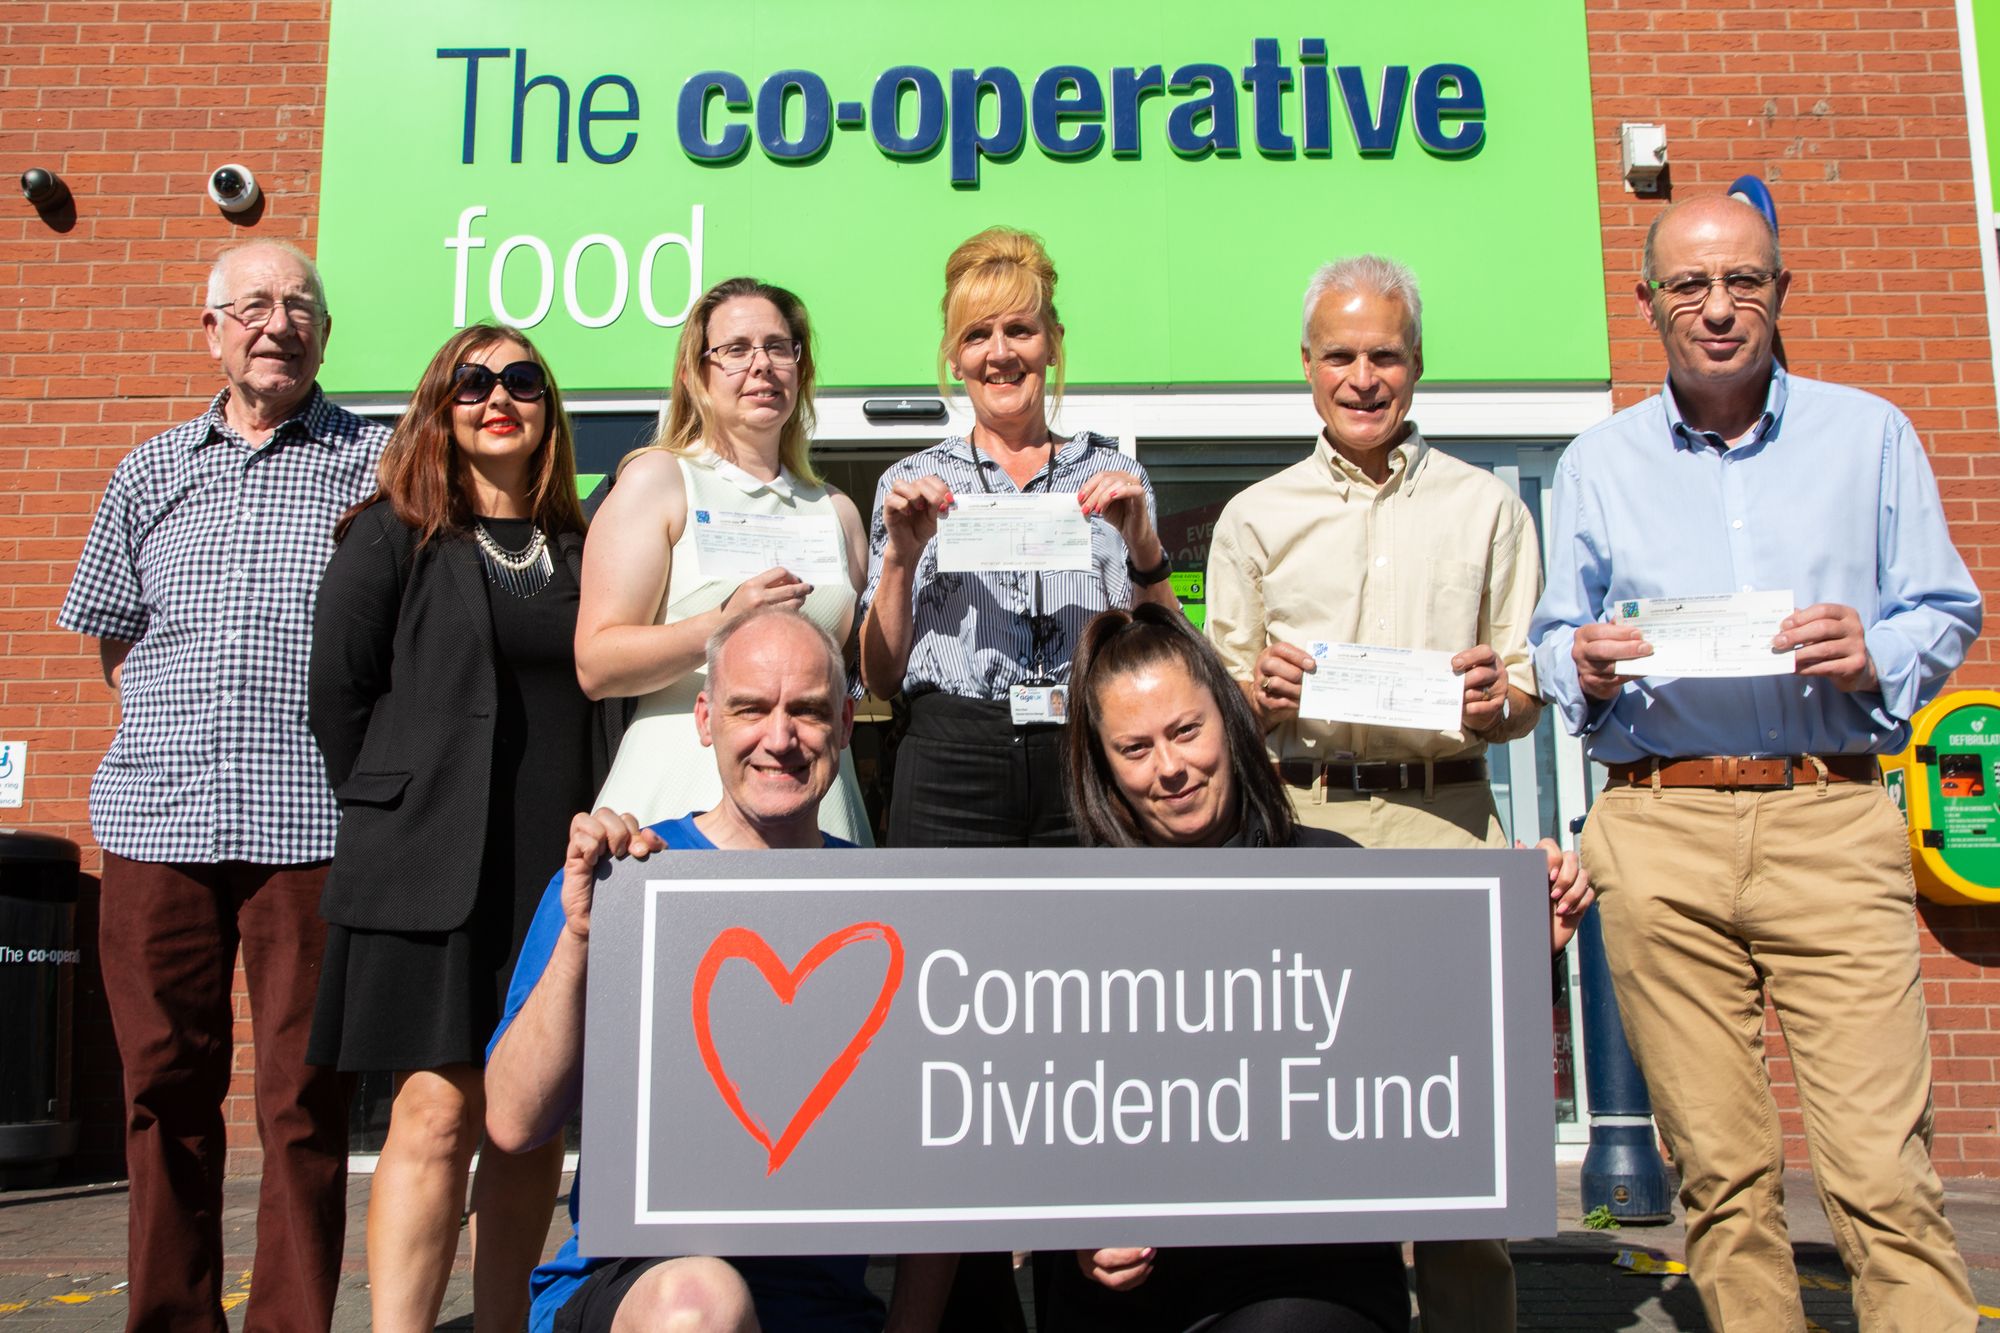 Charities and community groups can apply for up to £5,000 as part of relaunched Community Dividend Fund